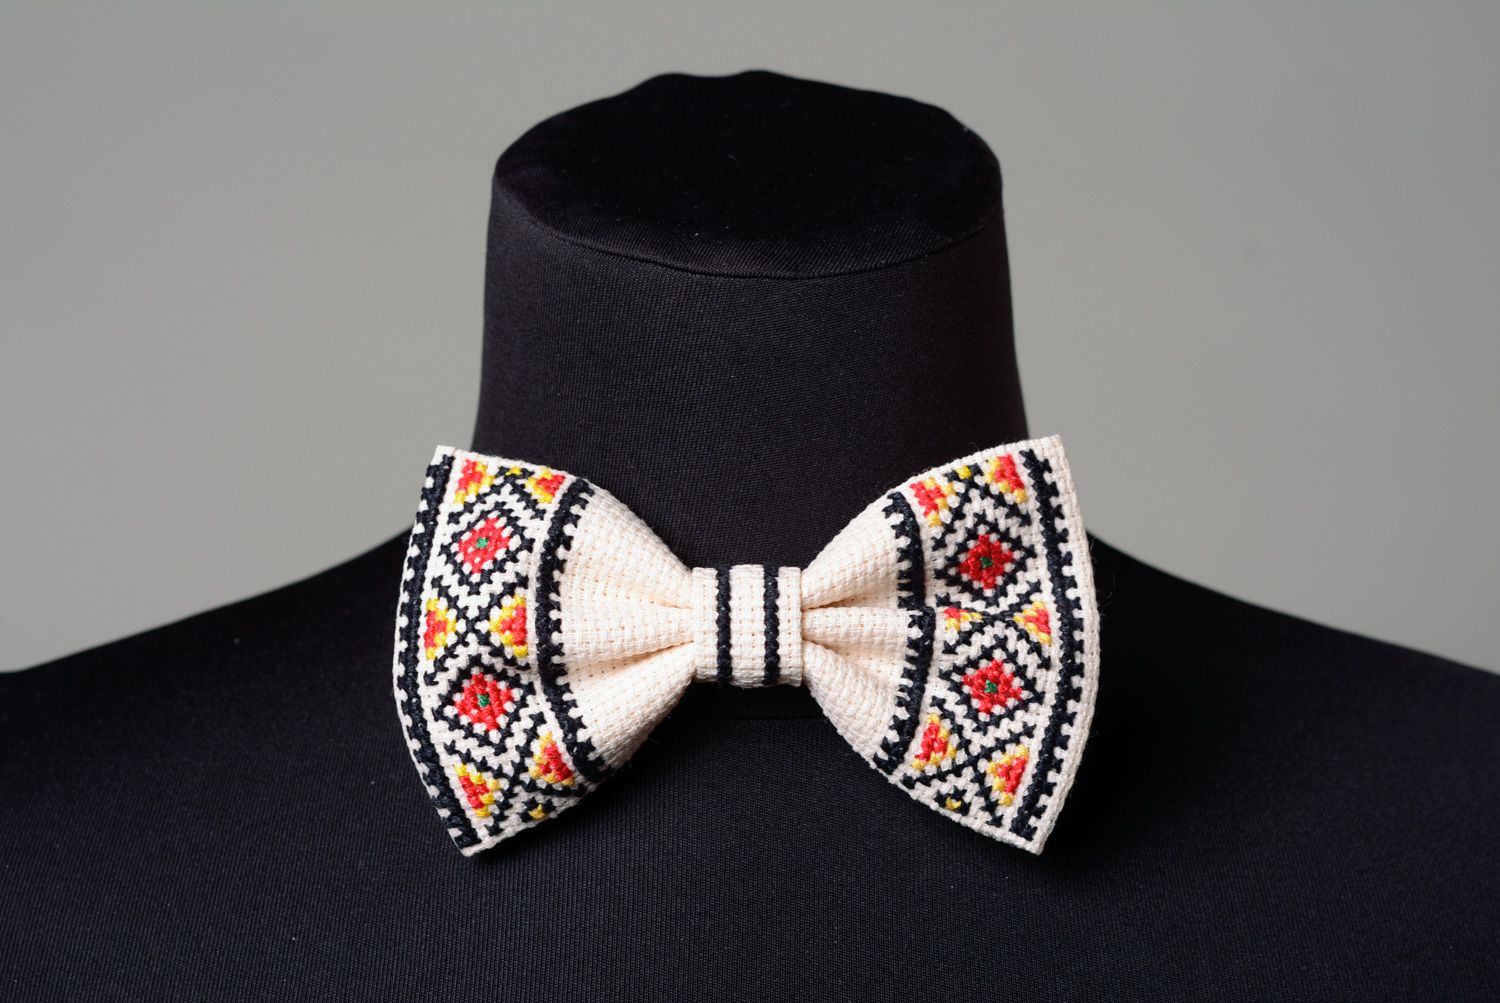 Handmade ethnic white bow tie with traditional cross stitch embroidery for men photo 1